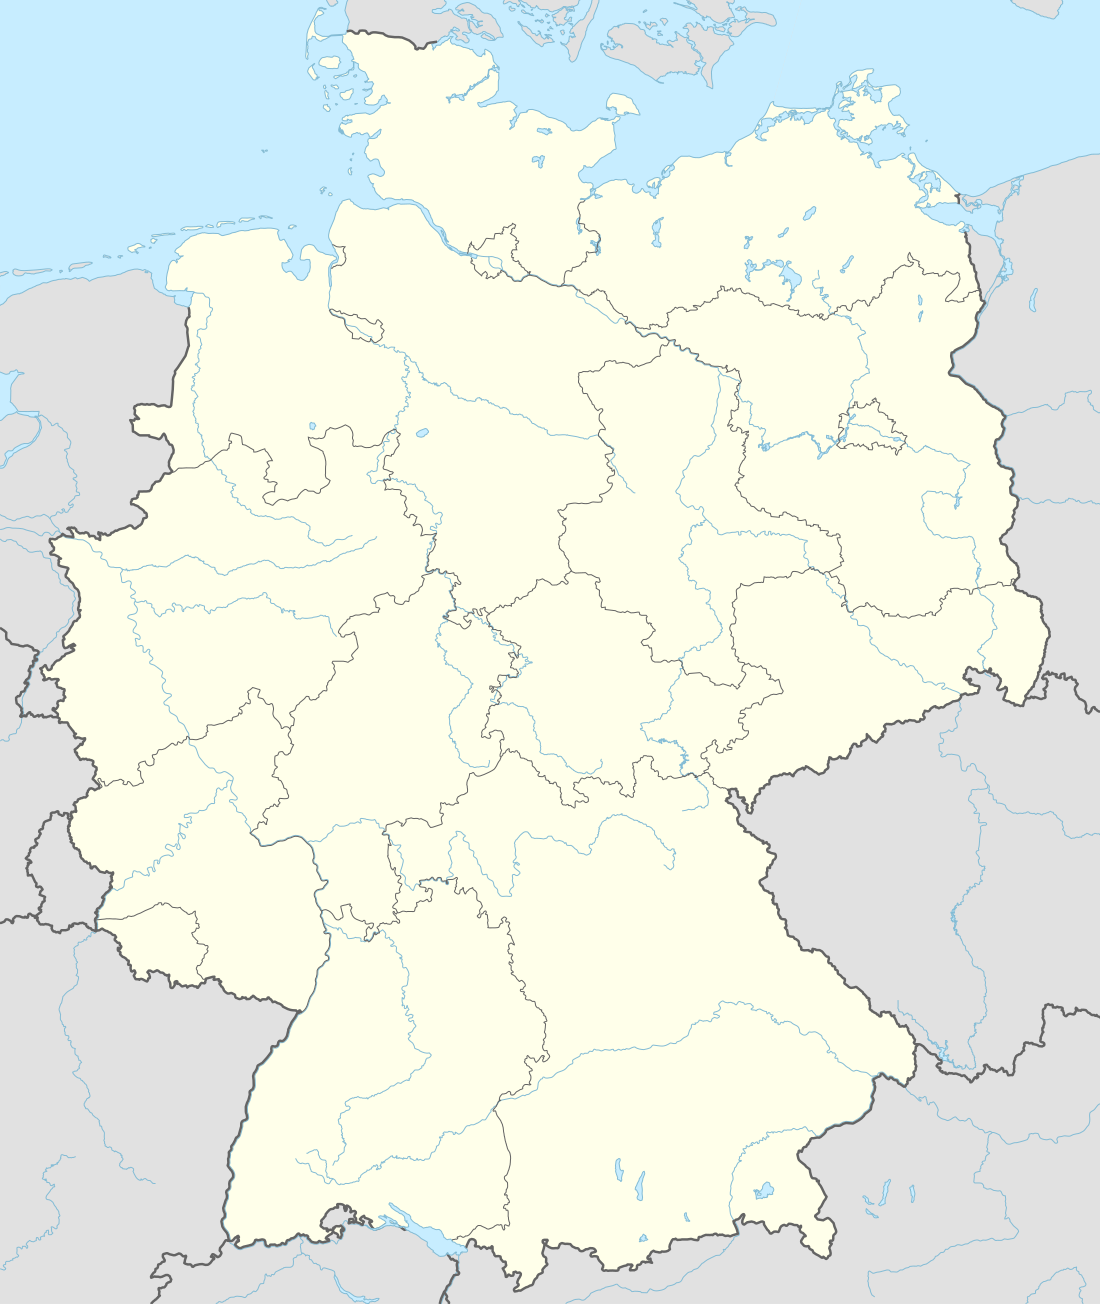 German Air Force is located in Germany